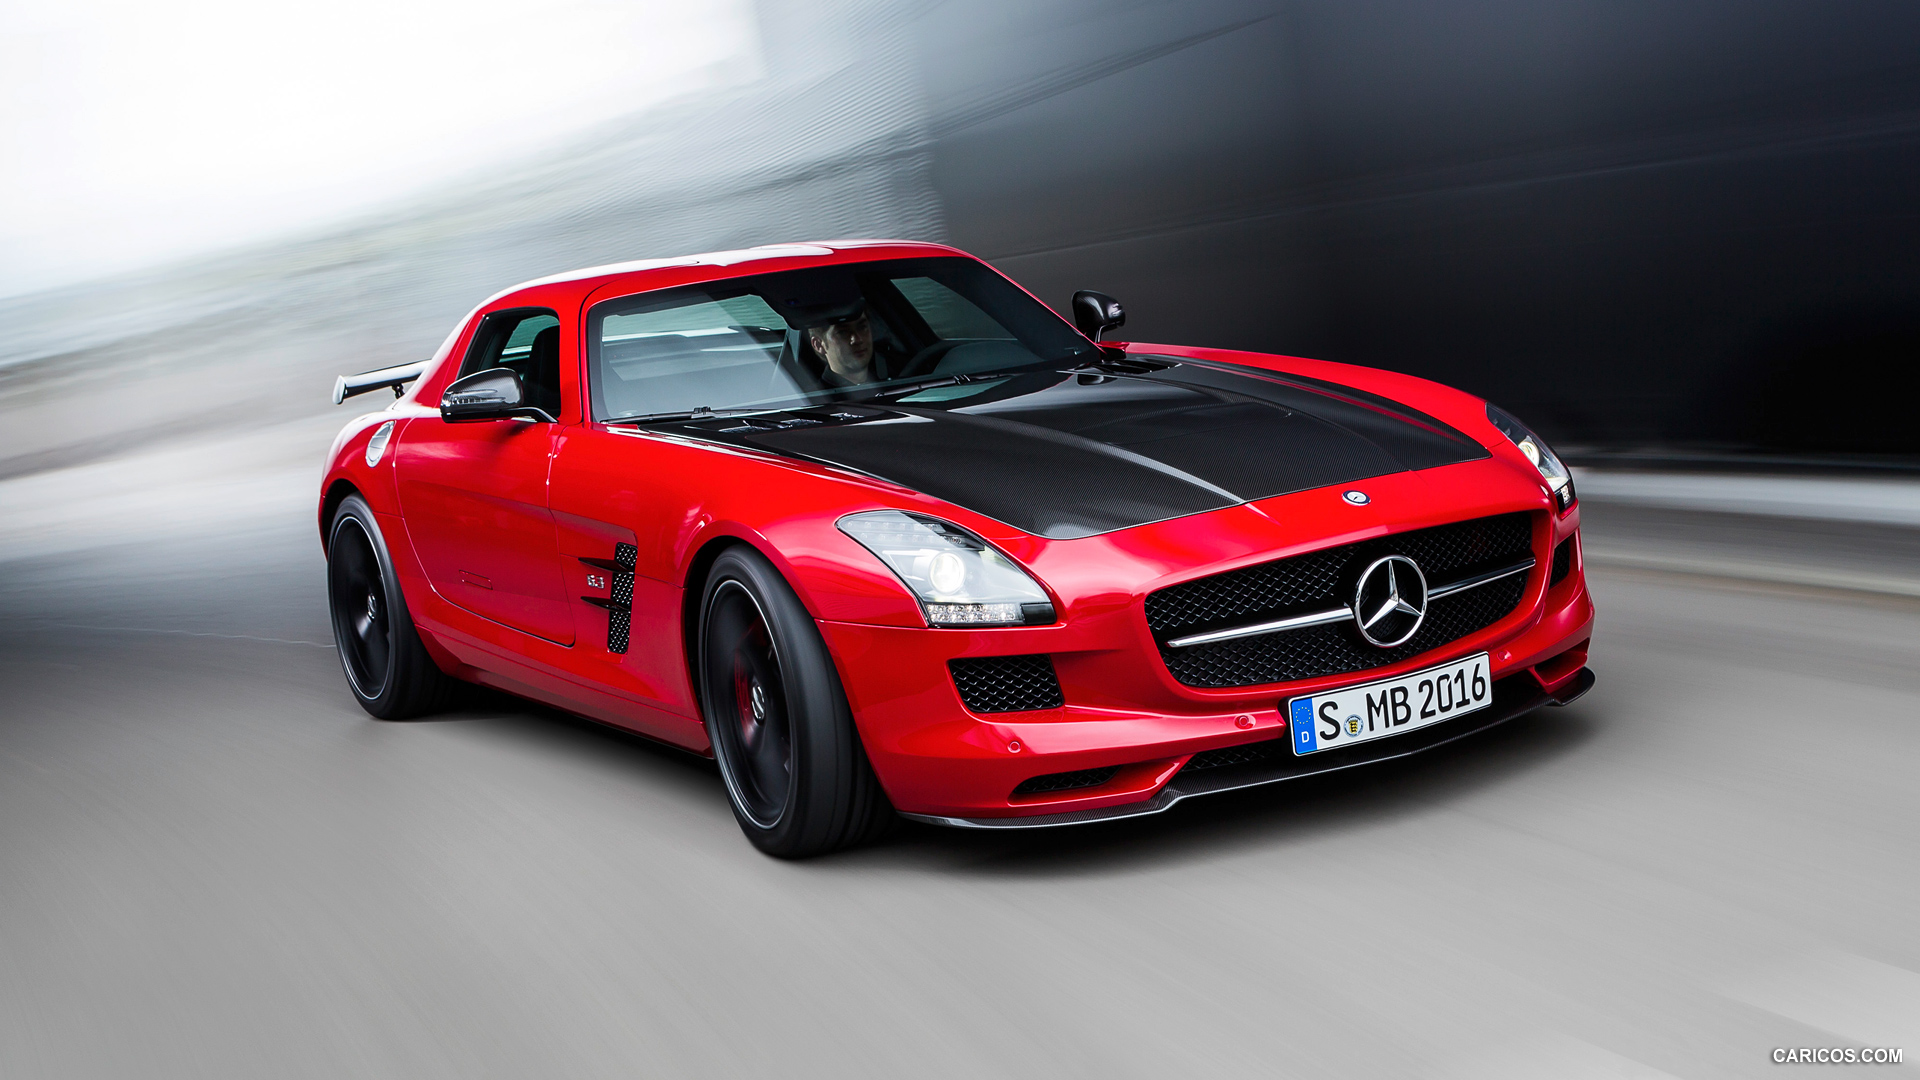  2015 Mercedes-Benz SLS AMG GT Coupe Final Edition - Front, #23 of 41